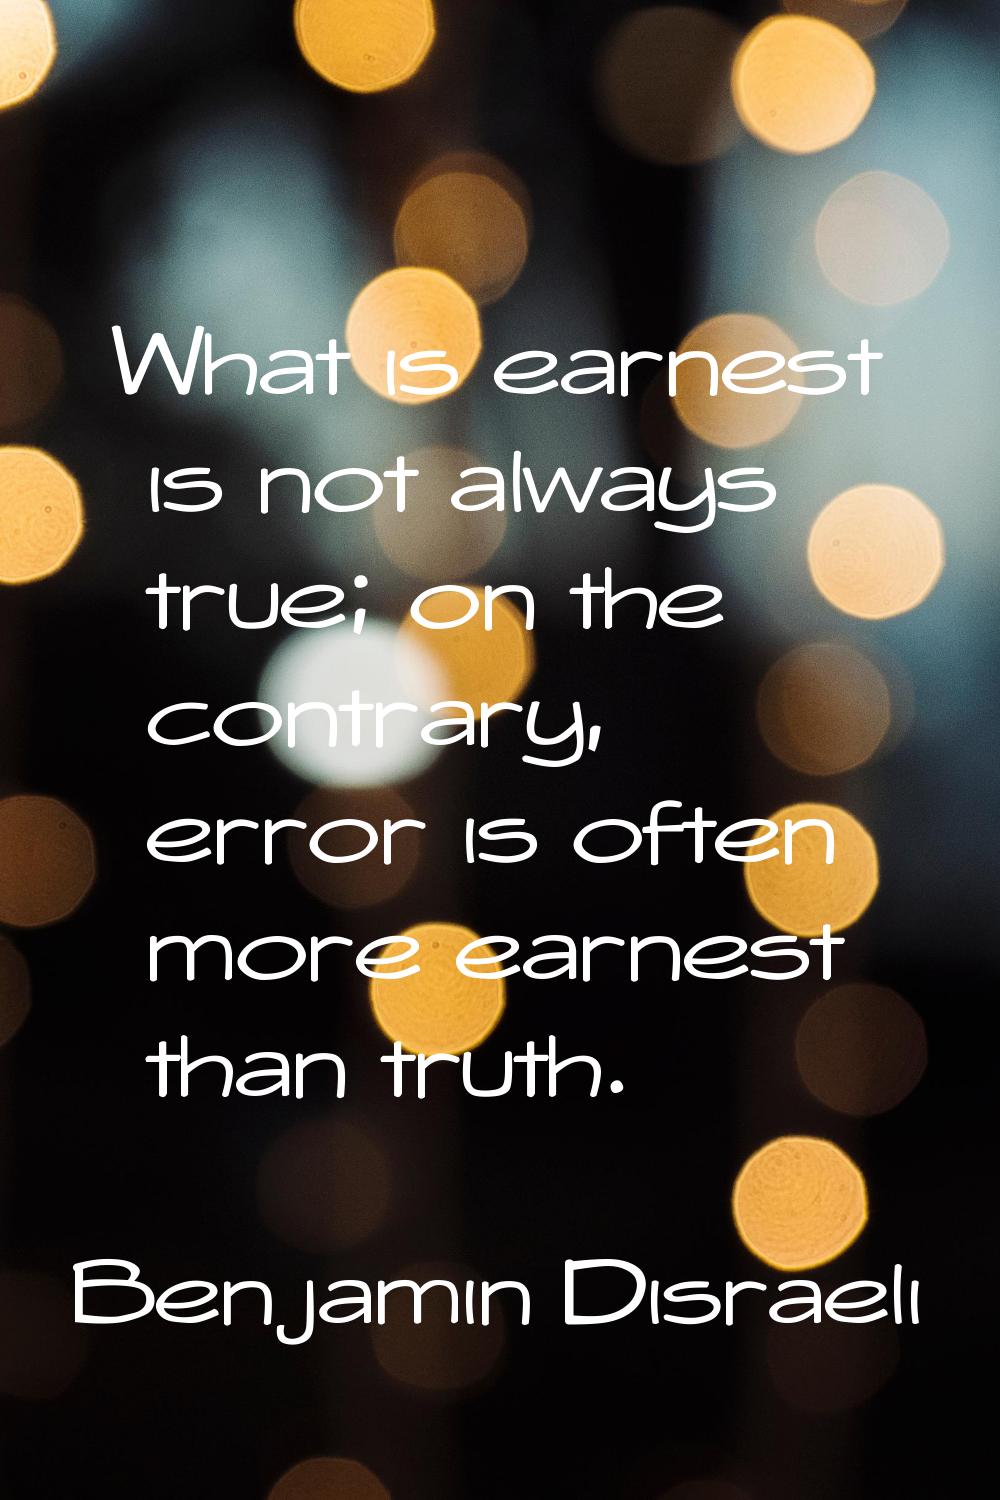 What is earnest is not always true; on the contrary, error is often more earnest than truth.